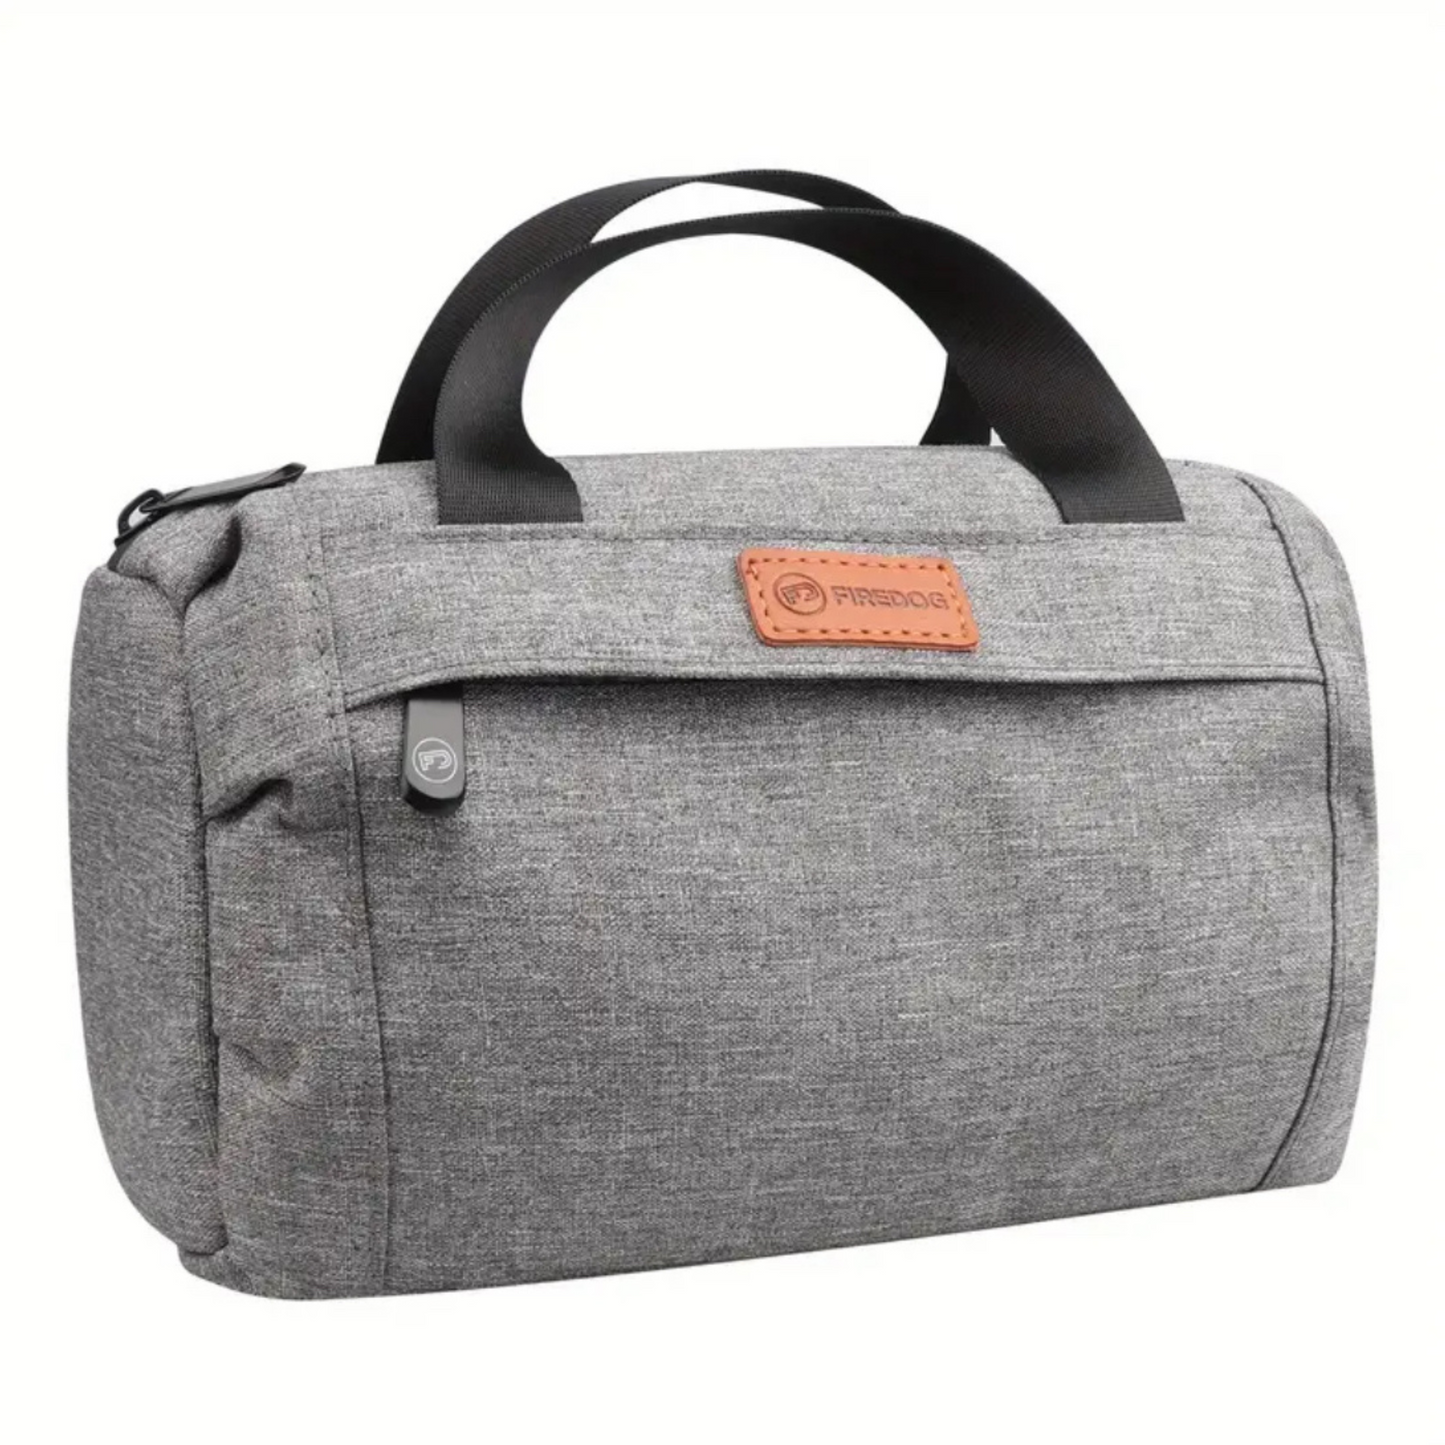 Smell Proof Small Duffle Bag